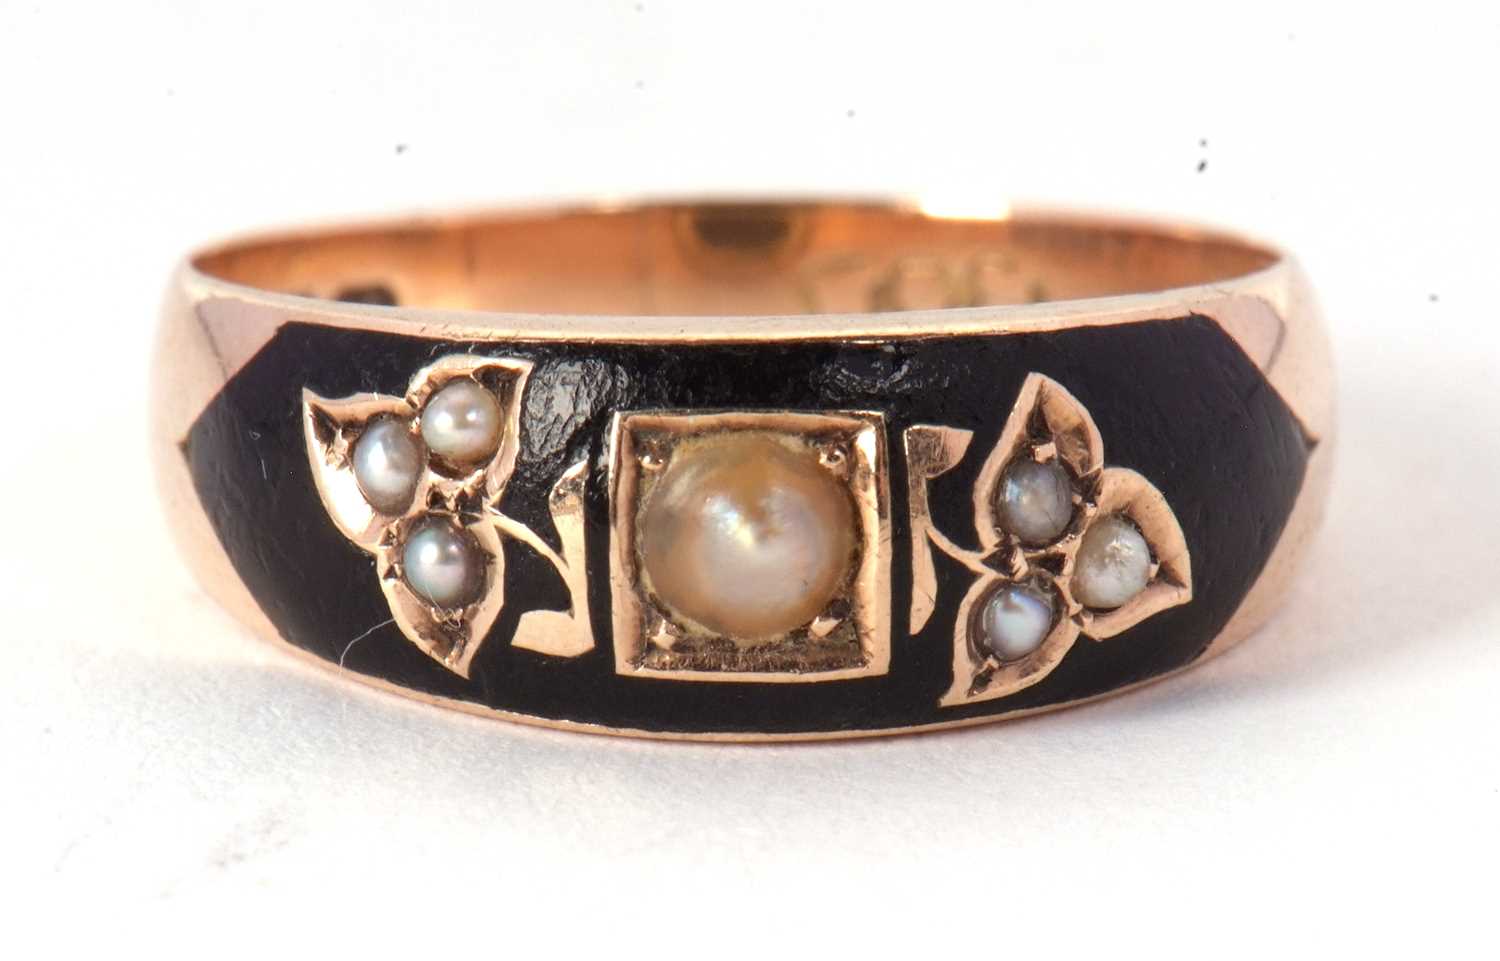 An early 20th century black enamel and seed pearl ring, the tapered black enamel set with seed